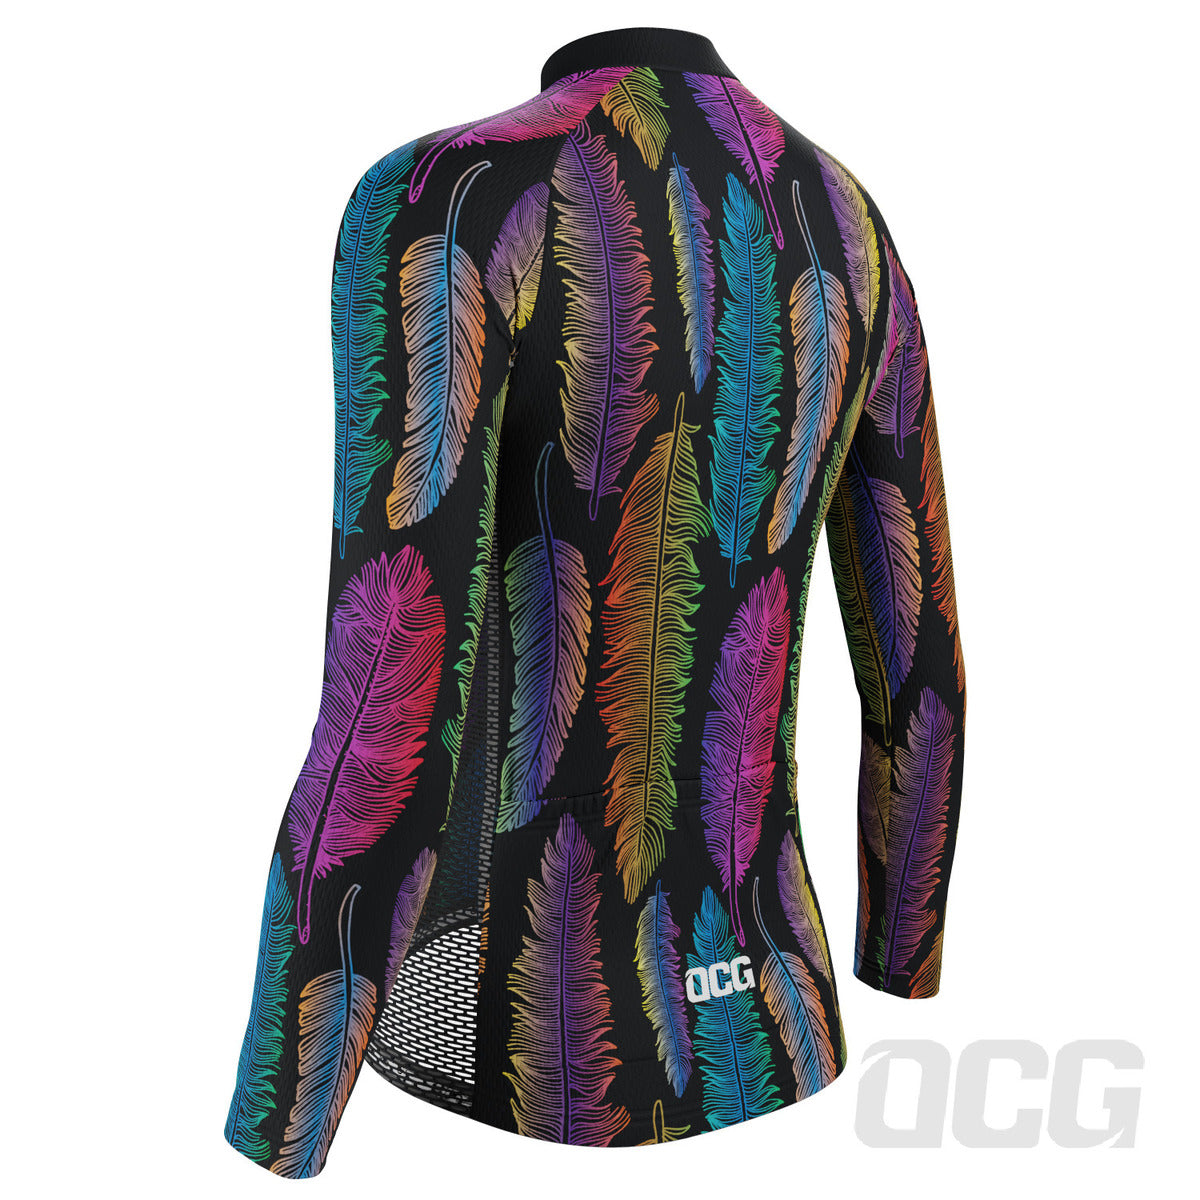 Women's Rainbow Feathers Long Sleeve Cycling Jersey